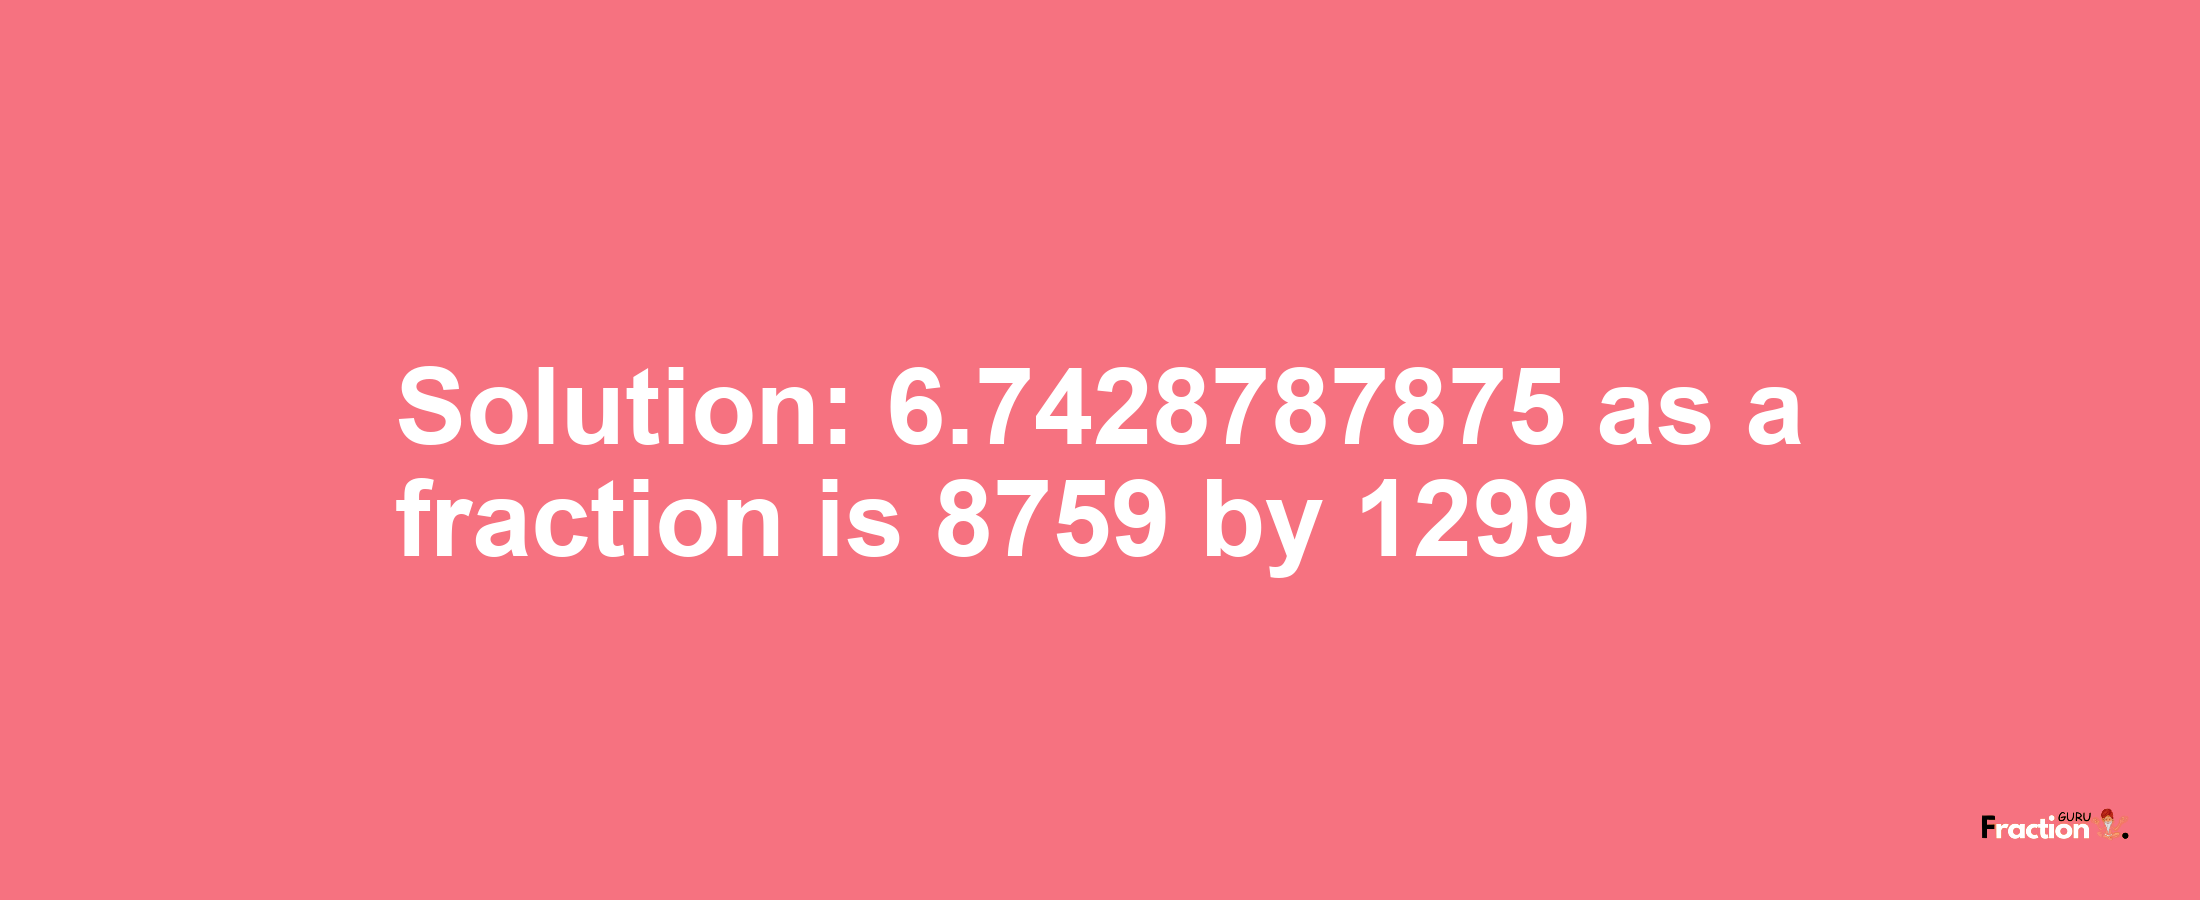 Solution:6.7428787875 as a fraction is 8759/1299